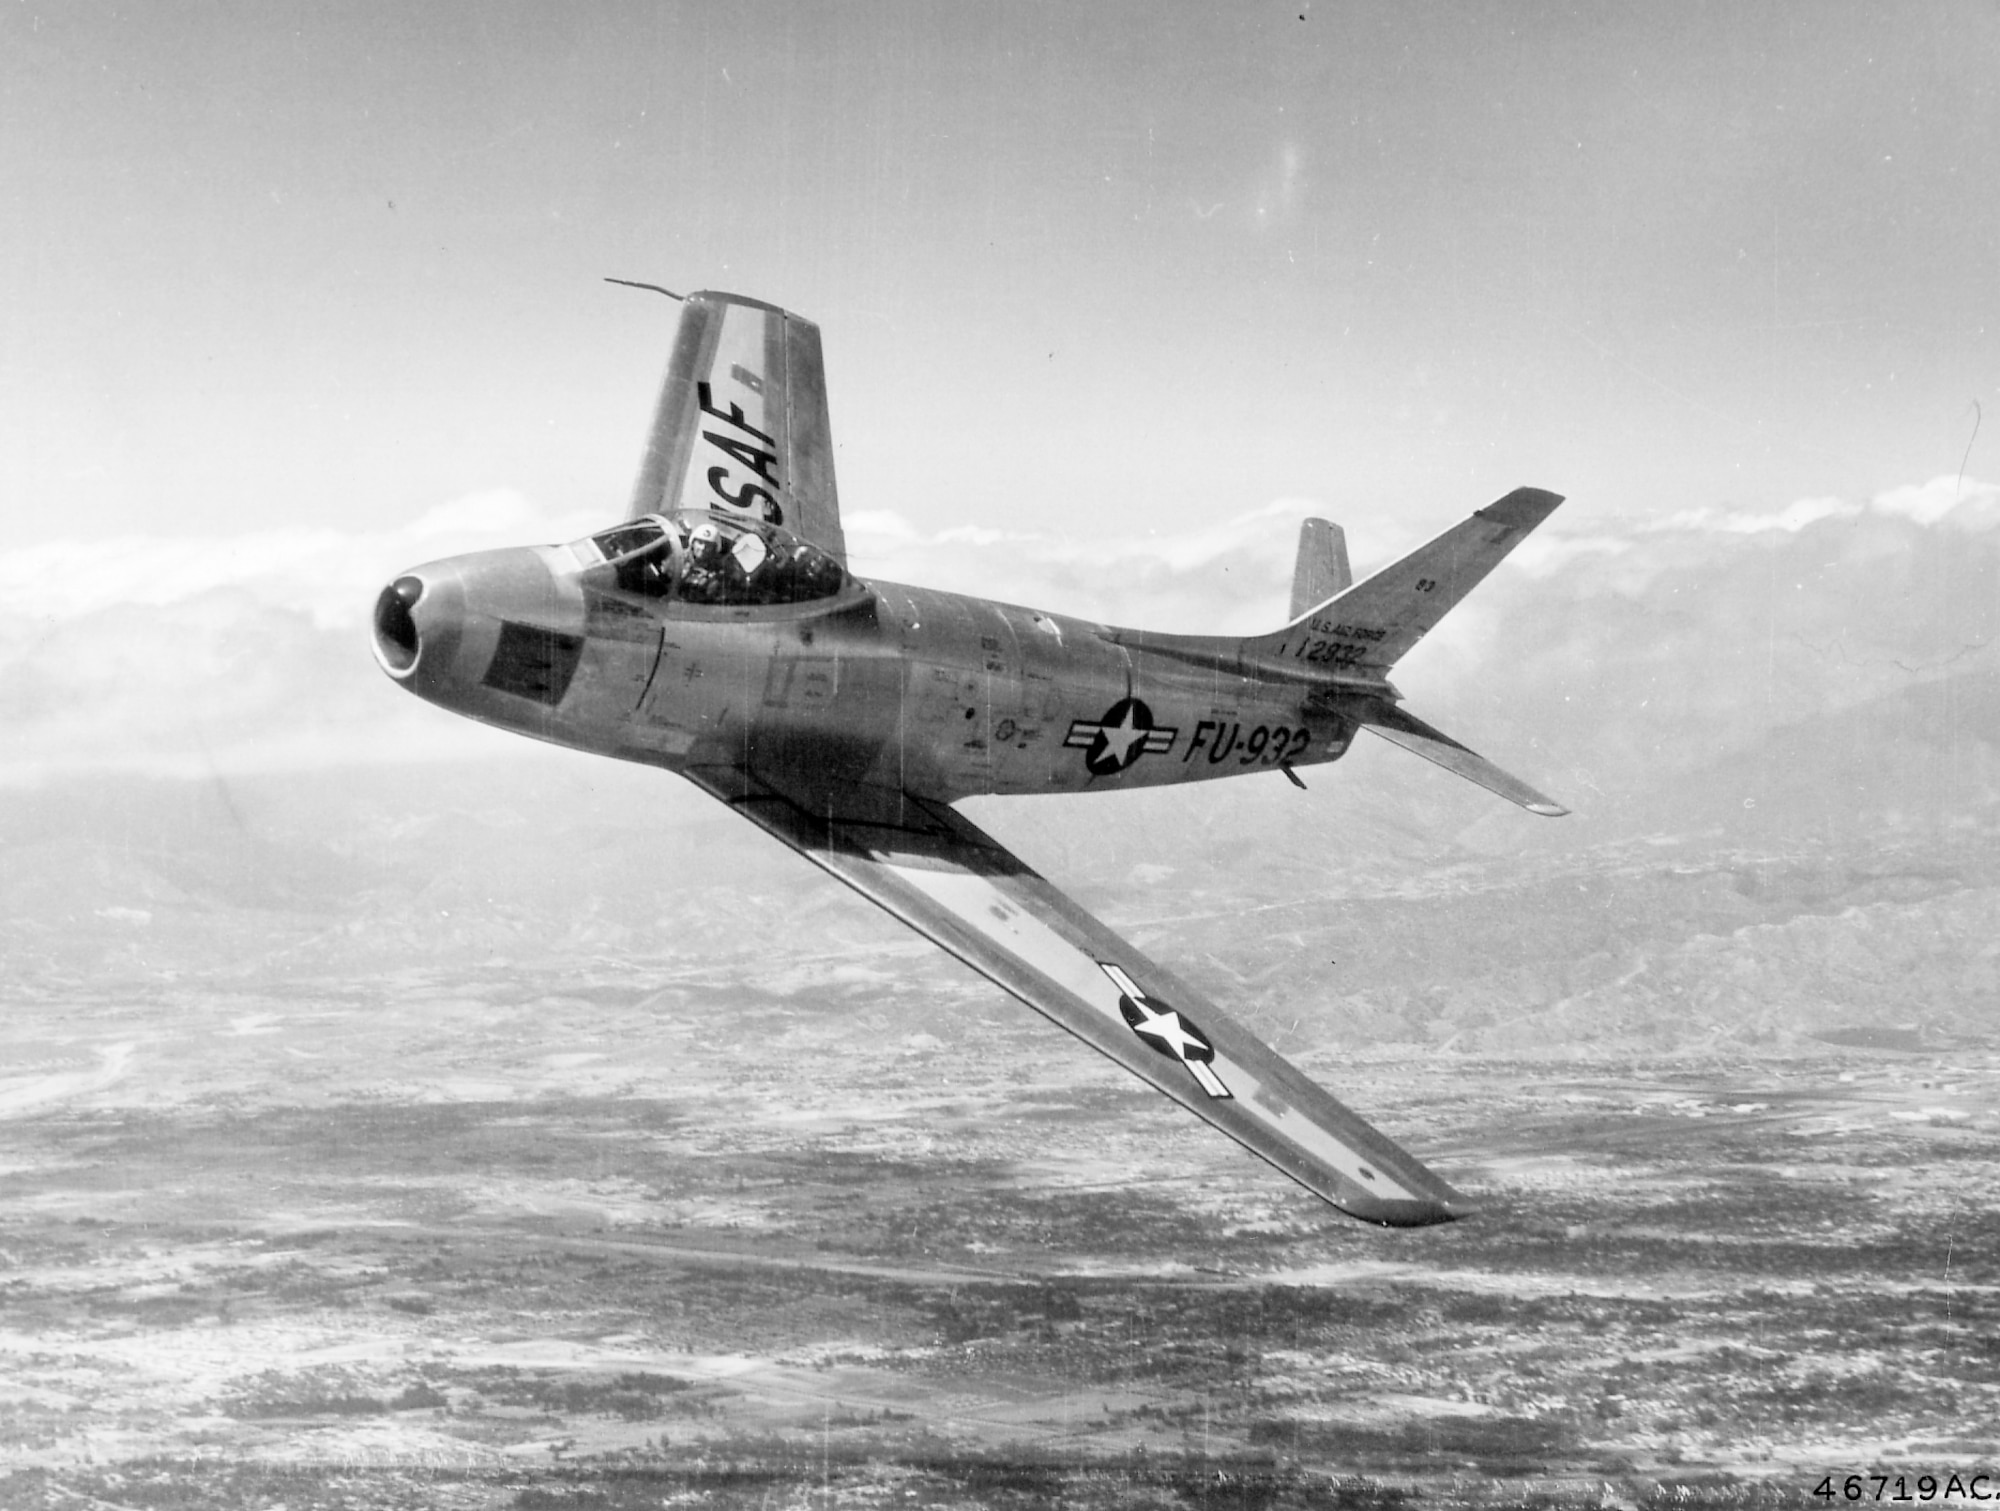 F-86 Sabrejet, 1953-59: The 113th Fighter-Interceptor Squadron inactivated, and its mission of protecting Scott AFB and the St. Louis area was assumed by the newly activated 85th Fighter Interceptor Squadron by flying F- 86 Sabrejets. The 85th moved into newly completed readiness and alert hangars on the east side Scott‘s flight line.